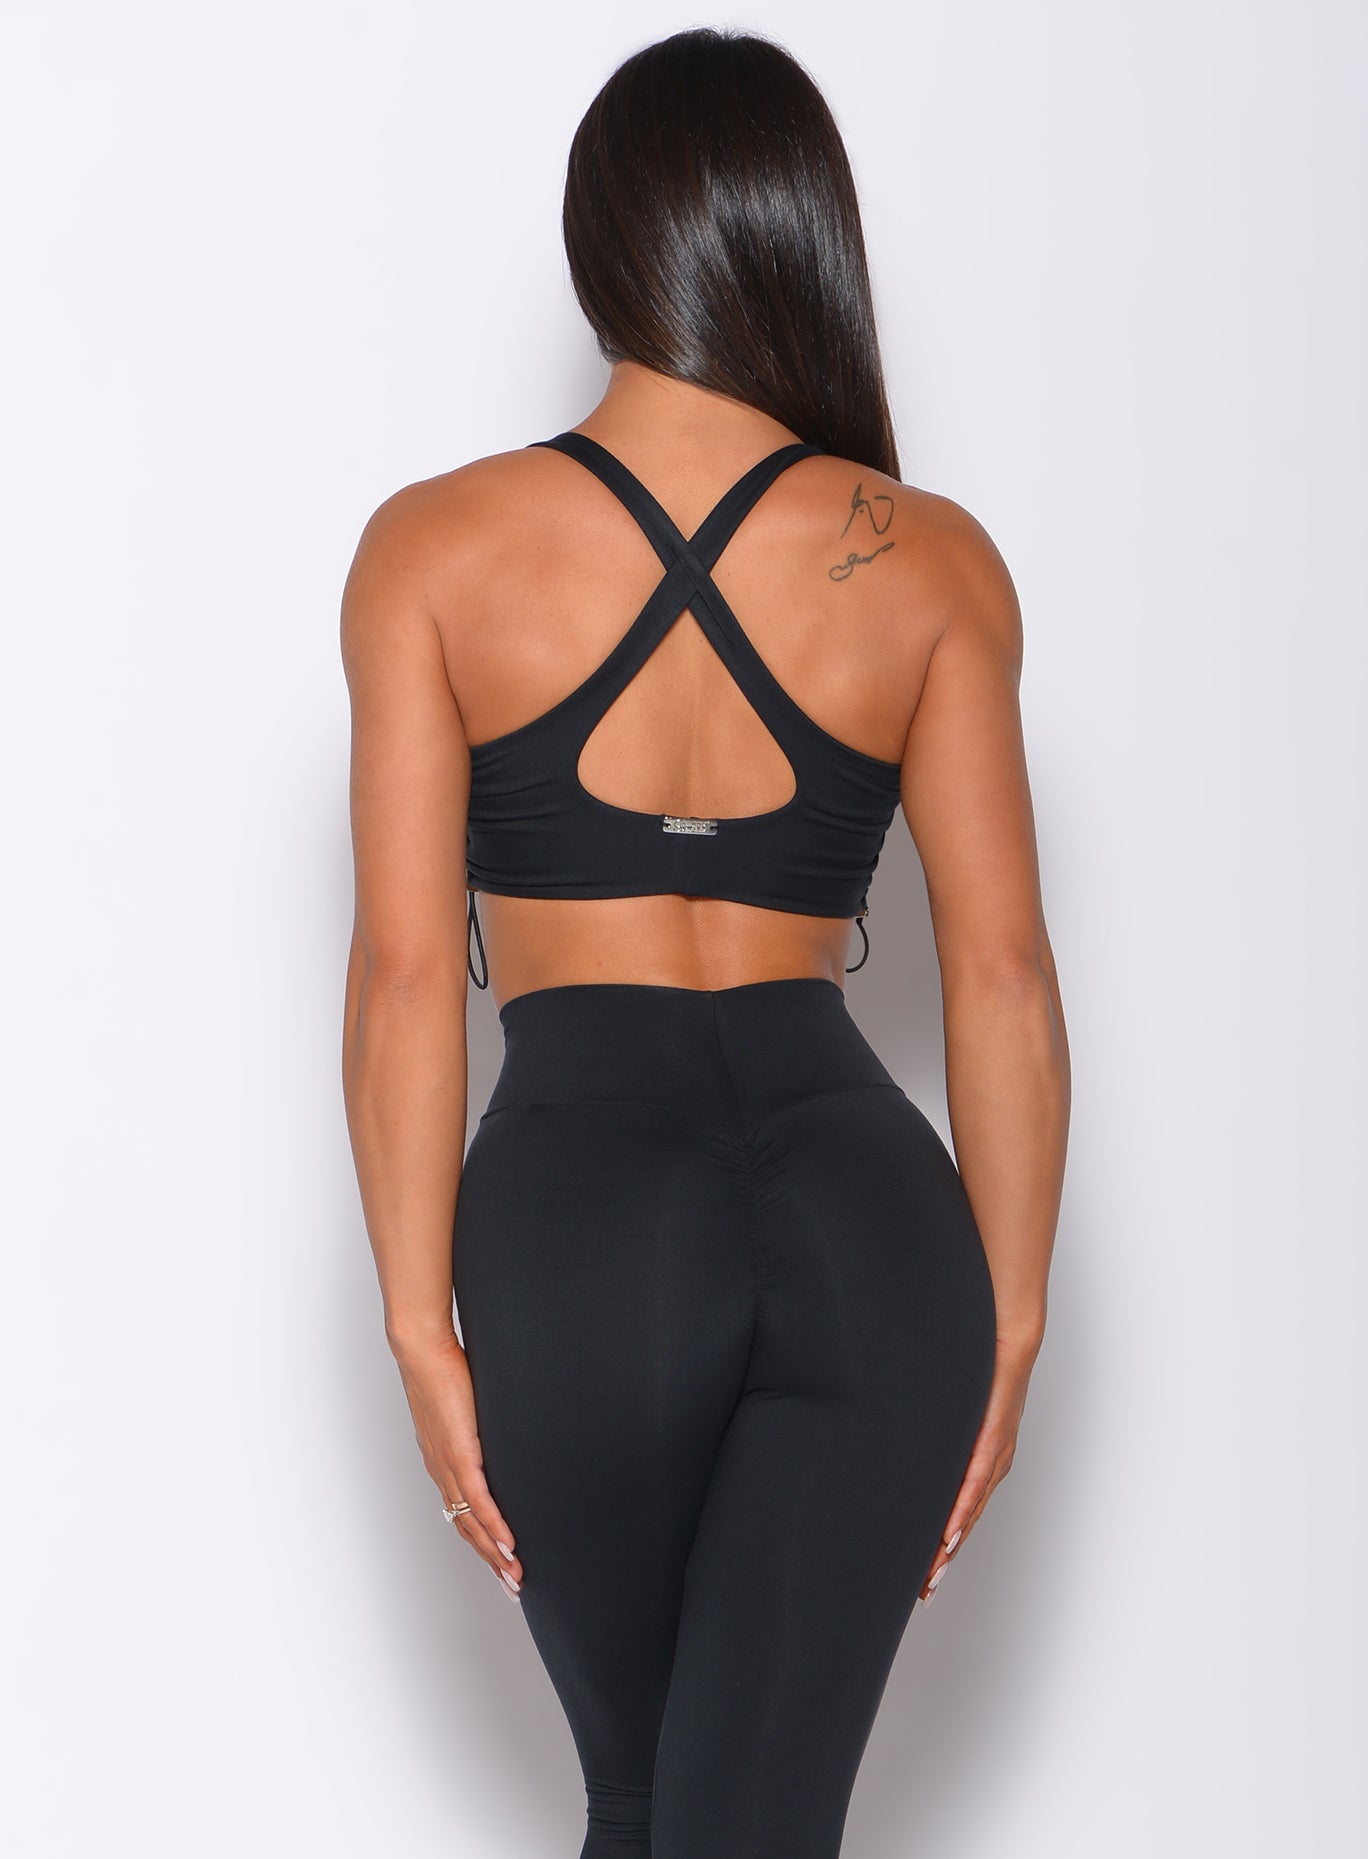 back view of a model of a model in our black toggle sports bra and a matching black leggings